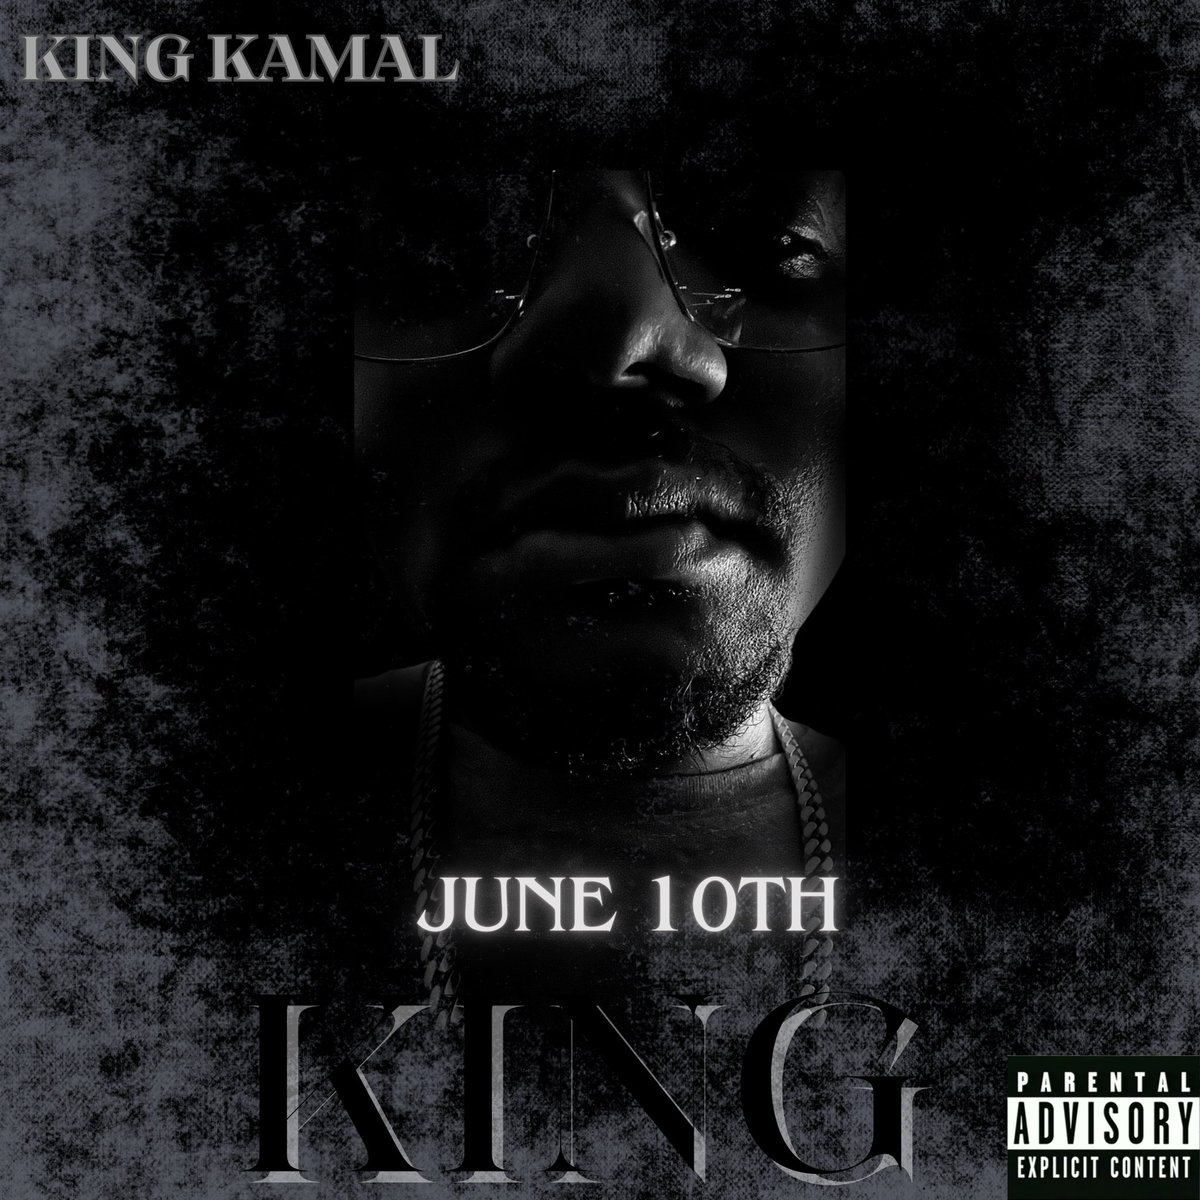 🔥🔥On June 10th a KING was born…
🎼The new solo album, KING by @KingKamalHipHop drops June 10th‼️

#newalbum #newrelease #newmusic #king  #kingkamal #june10th #bornday #global #peace #love #music #art #hiphop #dope #powerful #staytuned 🎧🪐